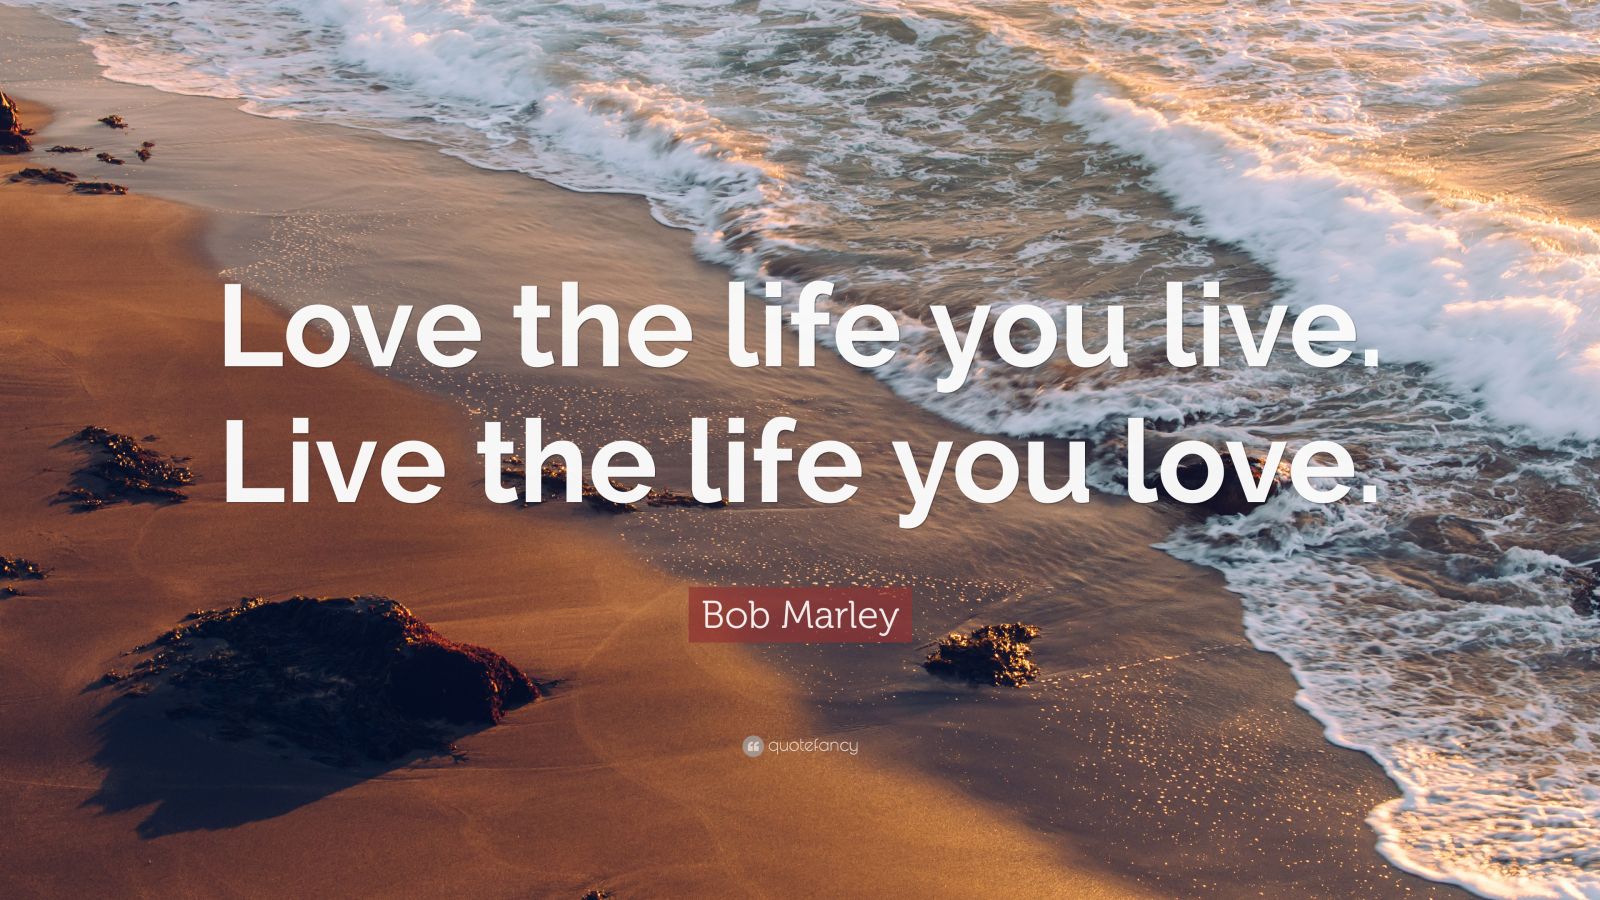 Bob Marley Quote “Love the life you live. Live the life you love.” (25